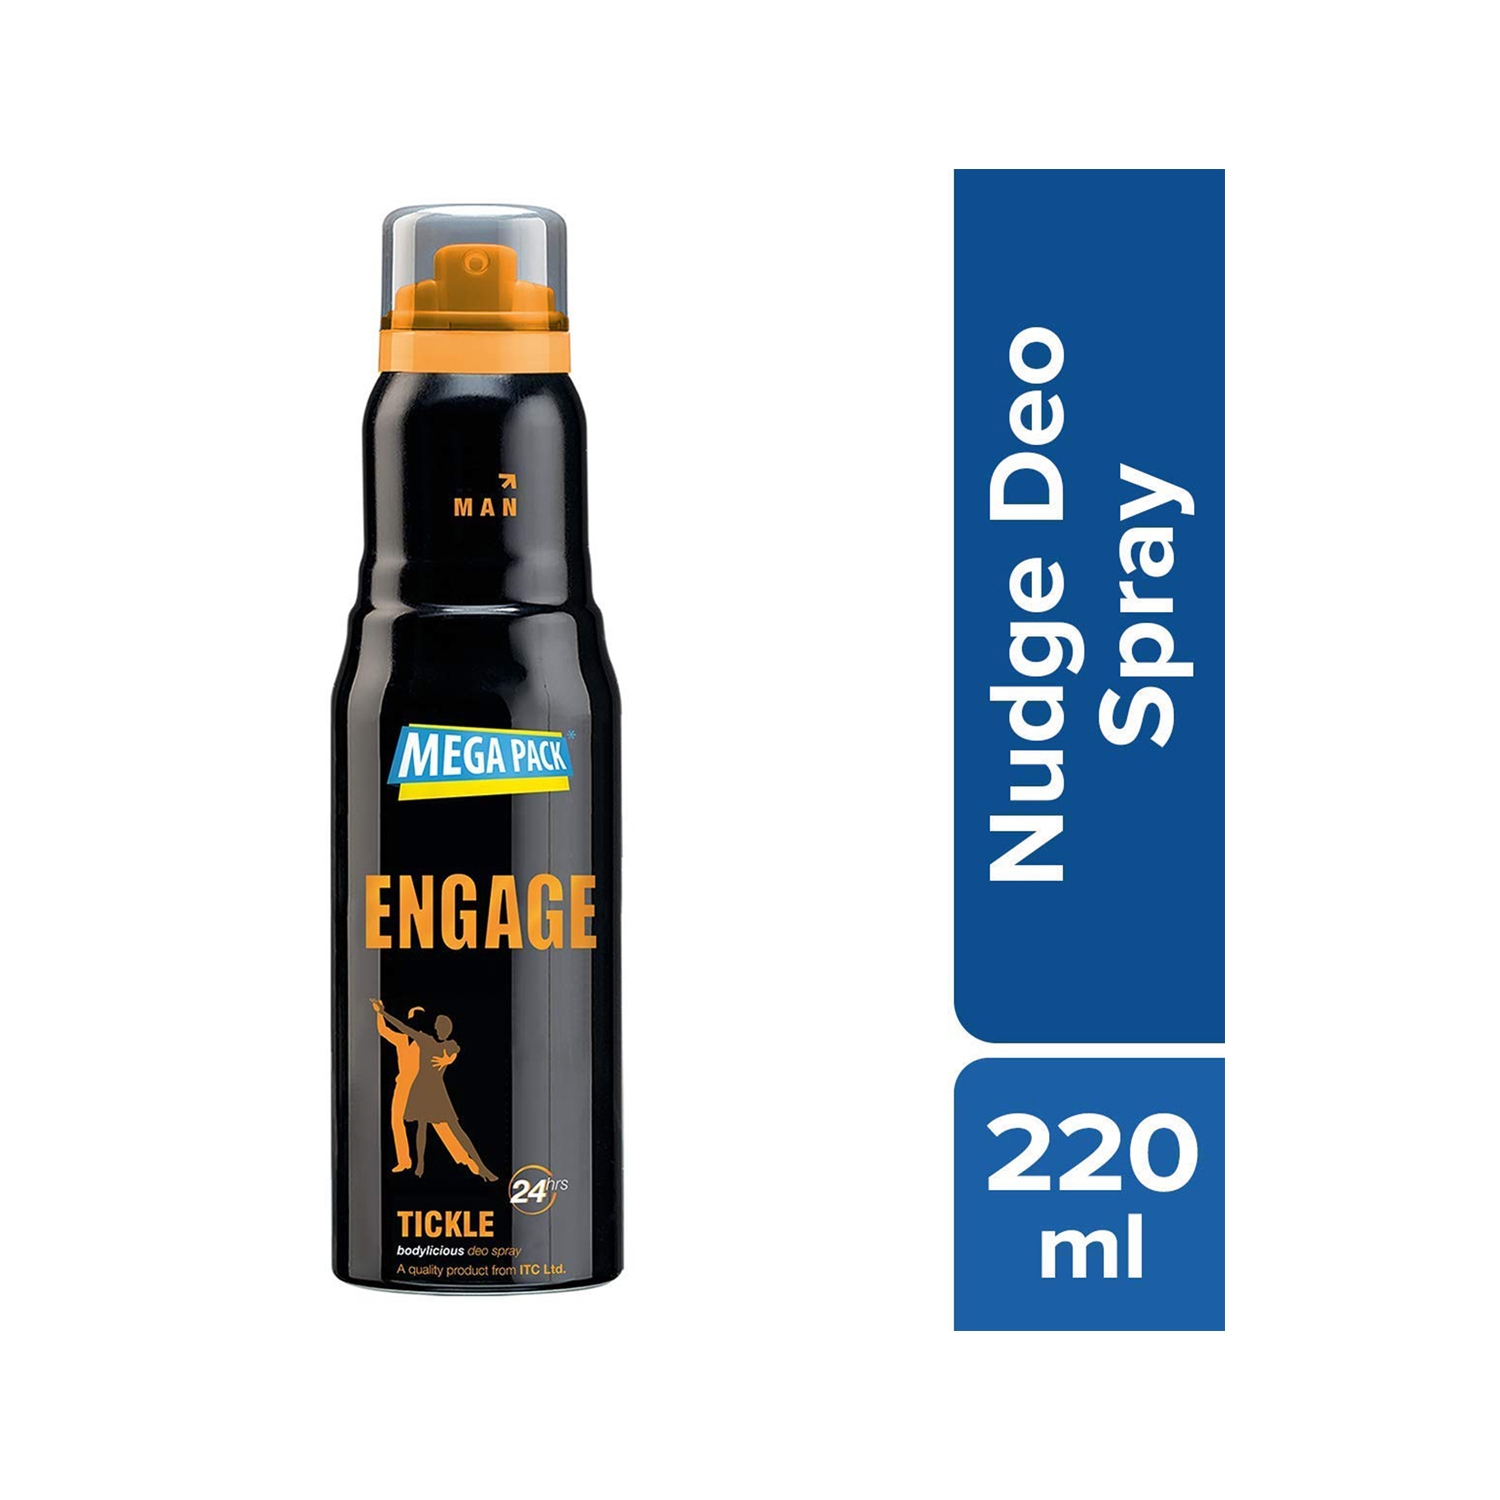 Engage | Engage Tickle Deodorant Spray For Man (220ml)